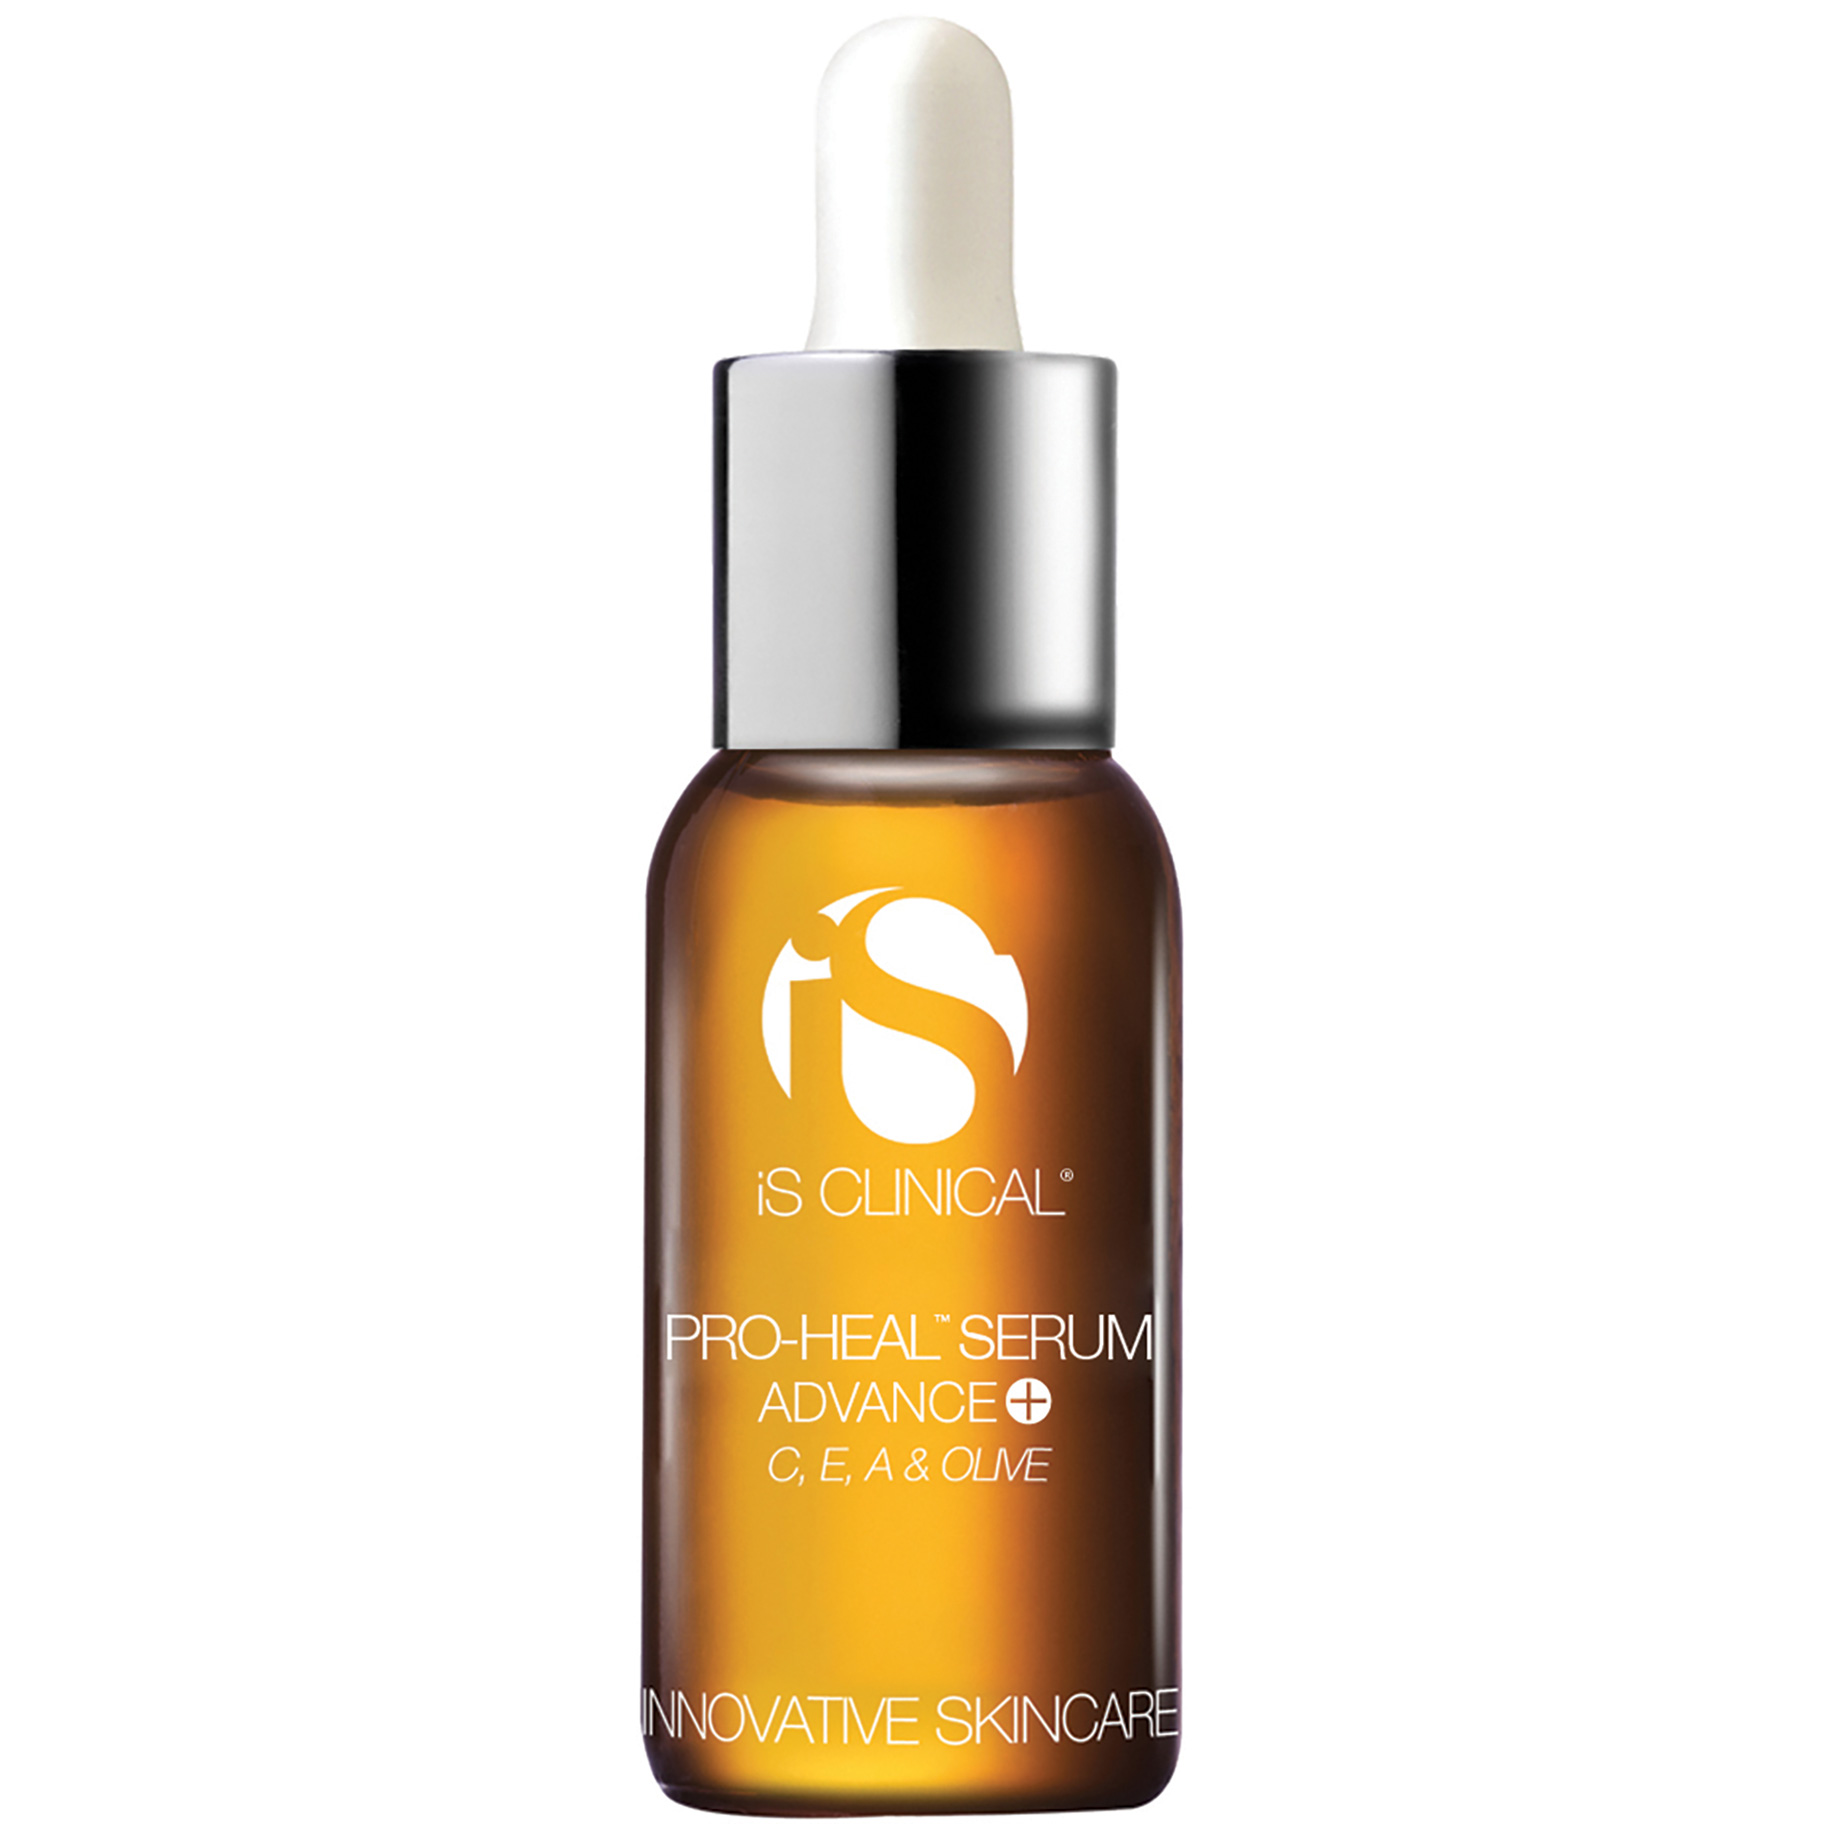 iS Clinical Pro-Heal Serum Advance+ 